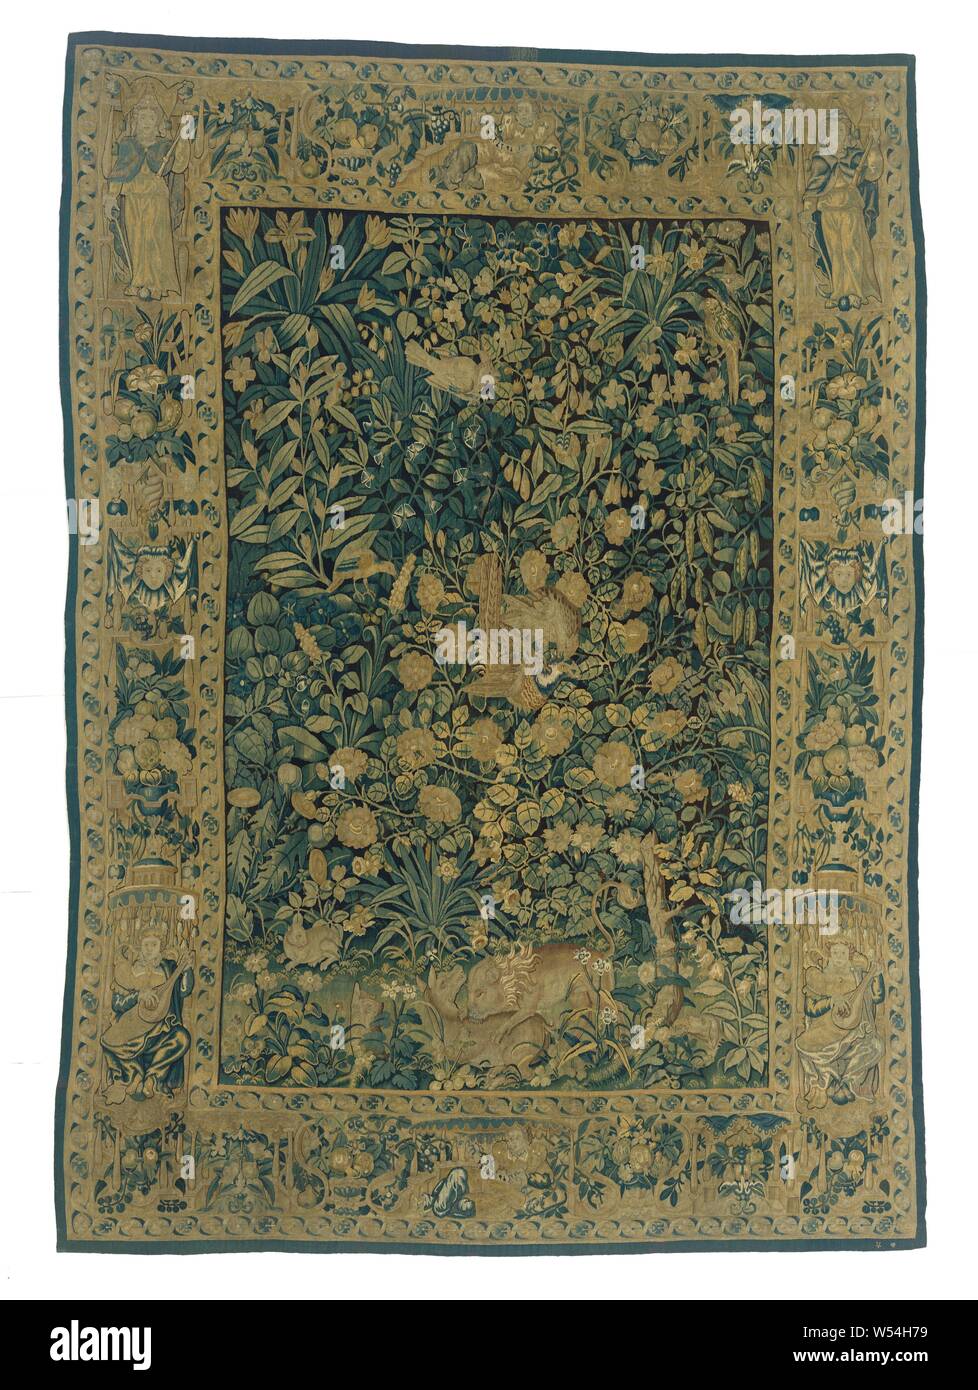 Verdure with animals, Tapestry, small-leafed verdure, with a sparrow hawk attacking a pheasant and a lion leaping a deer, a dog, a hare and three birds, with the Enghien city brand., anonymous, Edingen, c. 1550 - c. 1600, ketting, inslag, tapestry, h 318.0 cm × w 225.0 cm Stock Photo